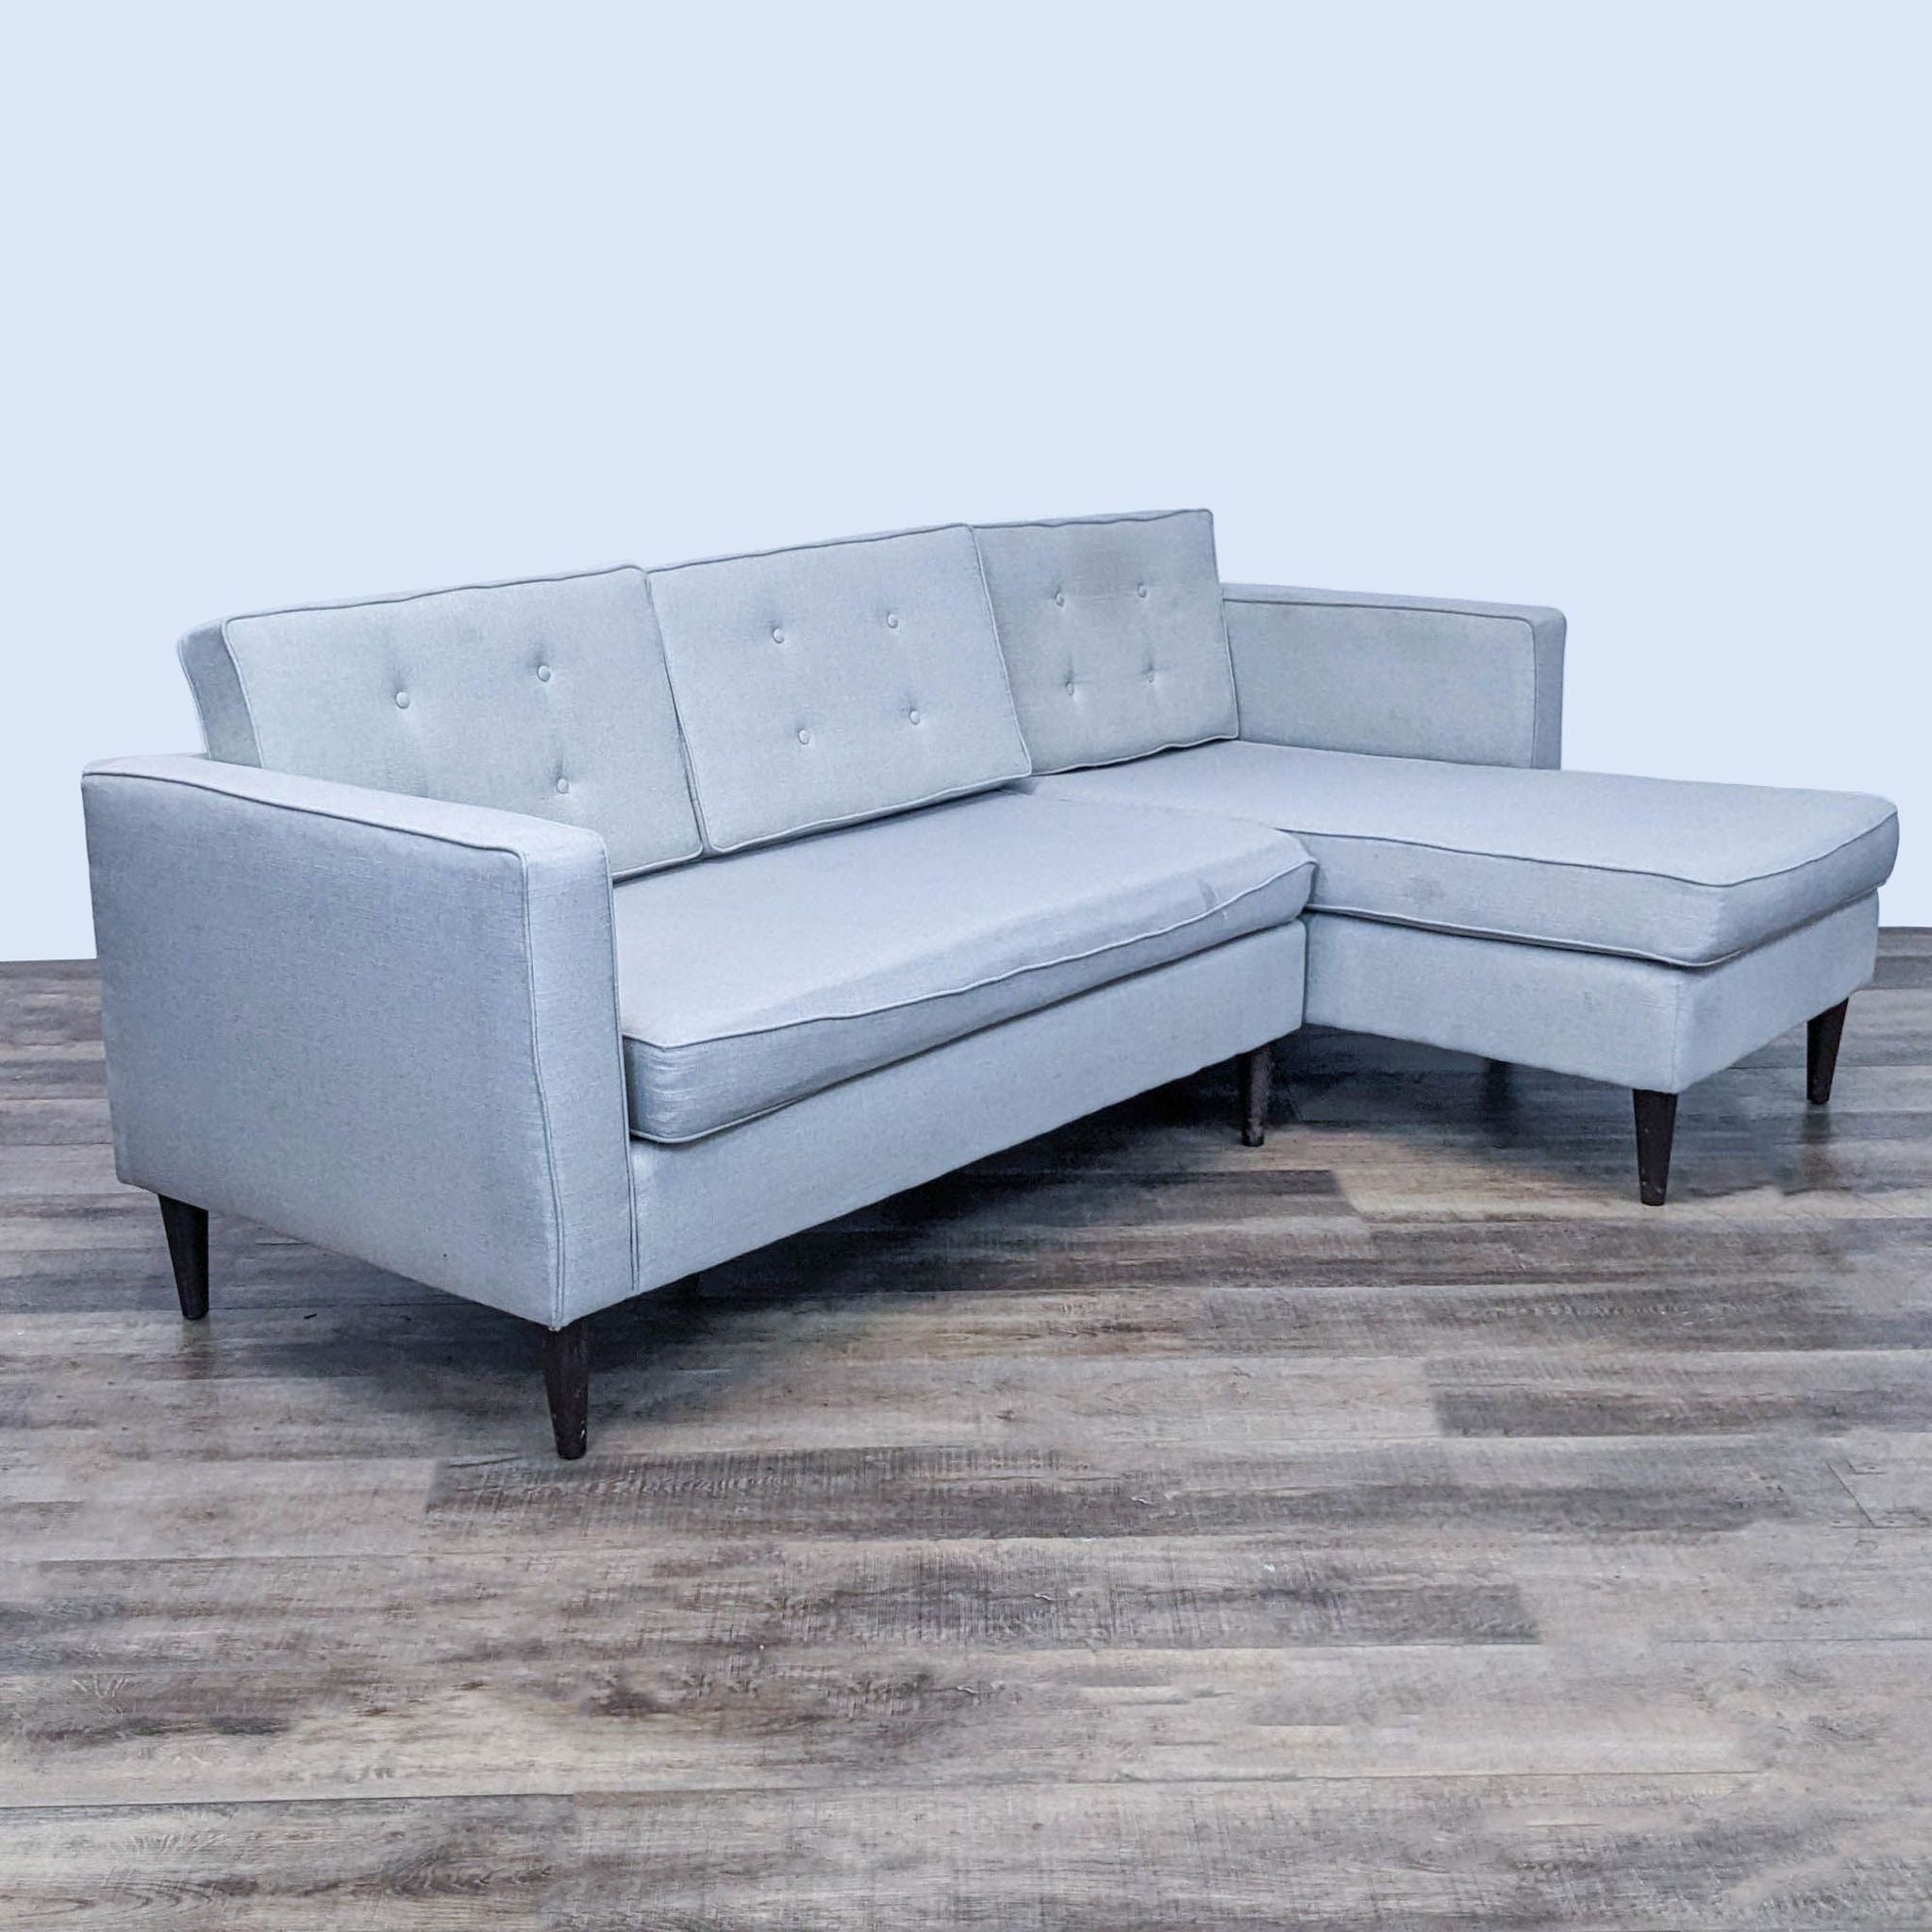 Light grey Reperch sectional couch featuring tufted cushions and sleek profile, viewed from different angles.